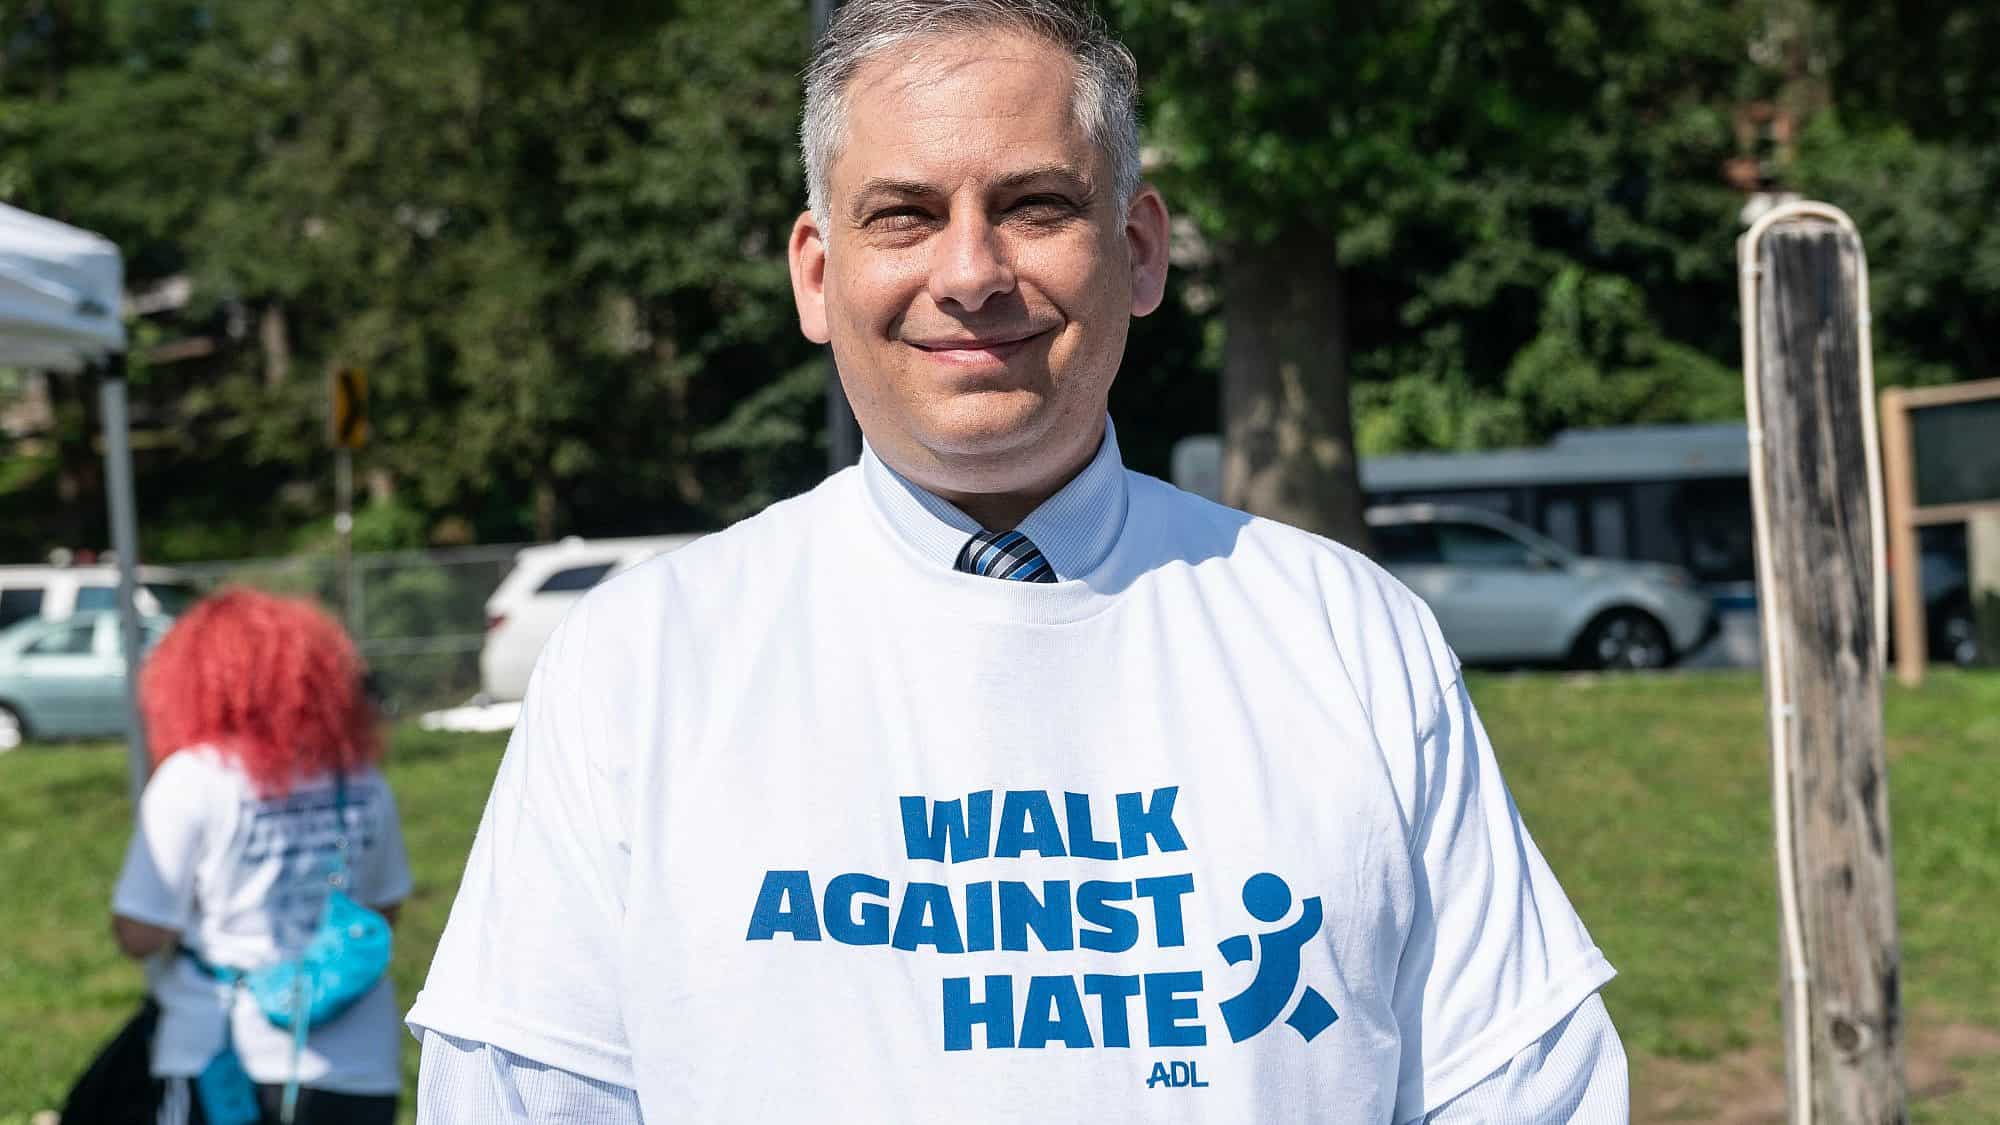 Acting Consul General of Israel attends the Anti-Defamation League's annual  “Walk Against Hate” in Van Cortland Park in New York on Aug. 20, 2023. Credit: Lev Radin/Shutterstock.